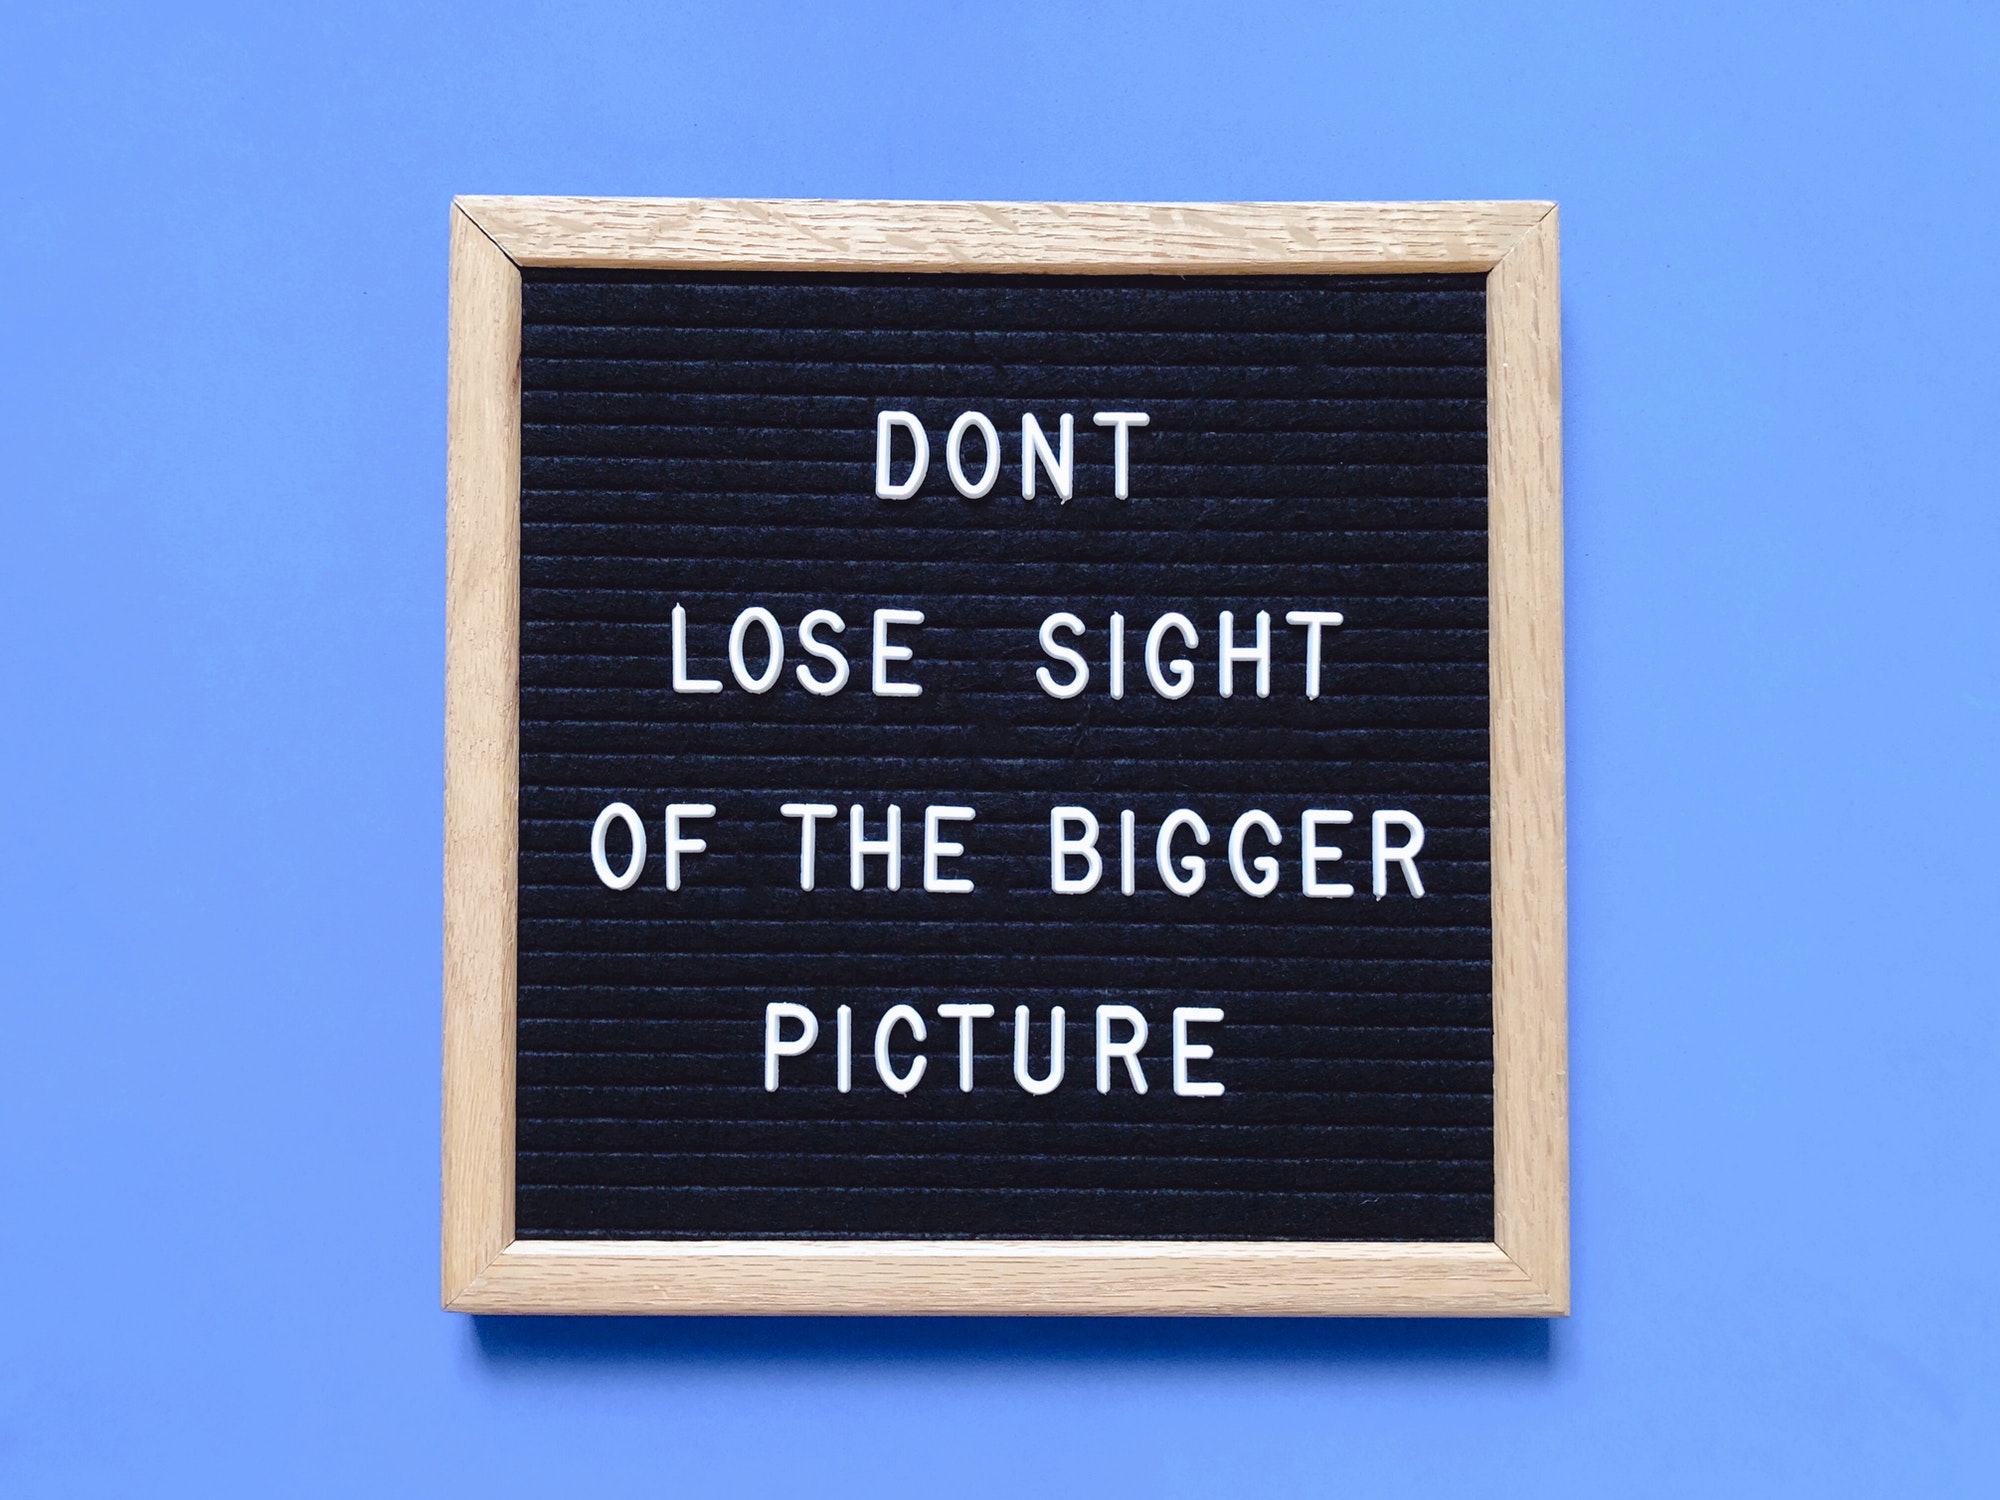 Don’t lose sight of the bigger picture